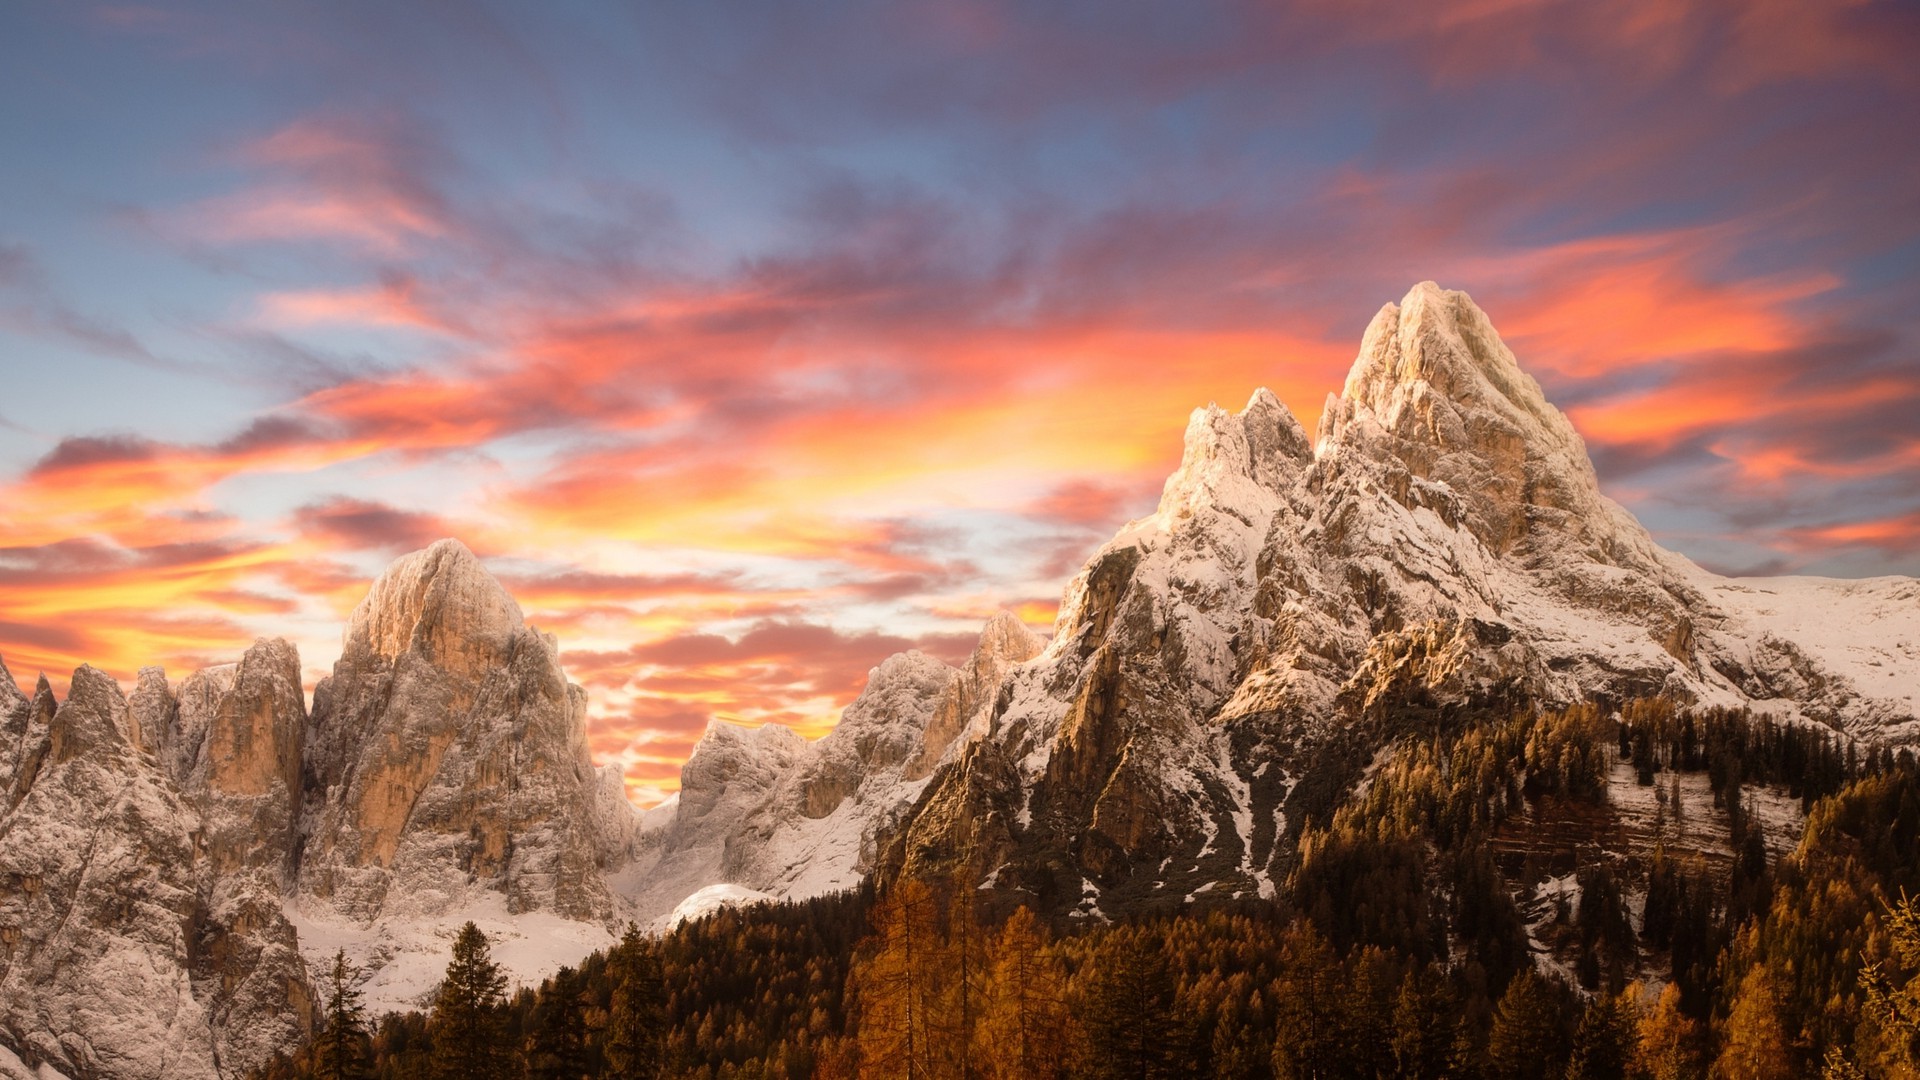 nature, Landscape, Sunset, Mountain, Snowy Peak, Sky, Forest, Fall, Dolomites (mountains), Italy Wallpaper